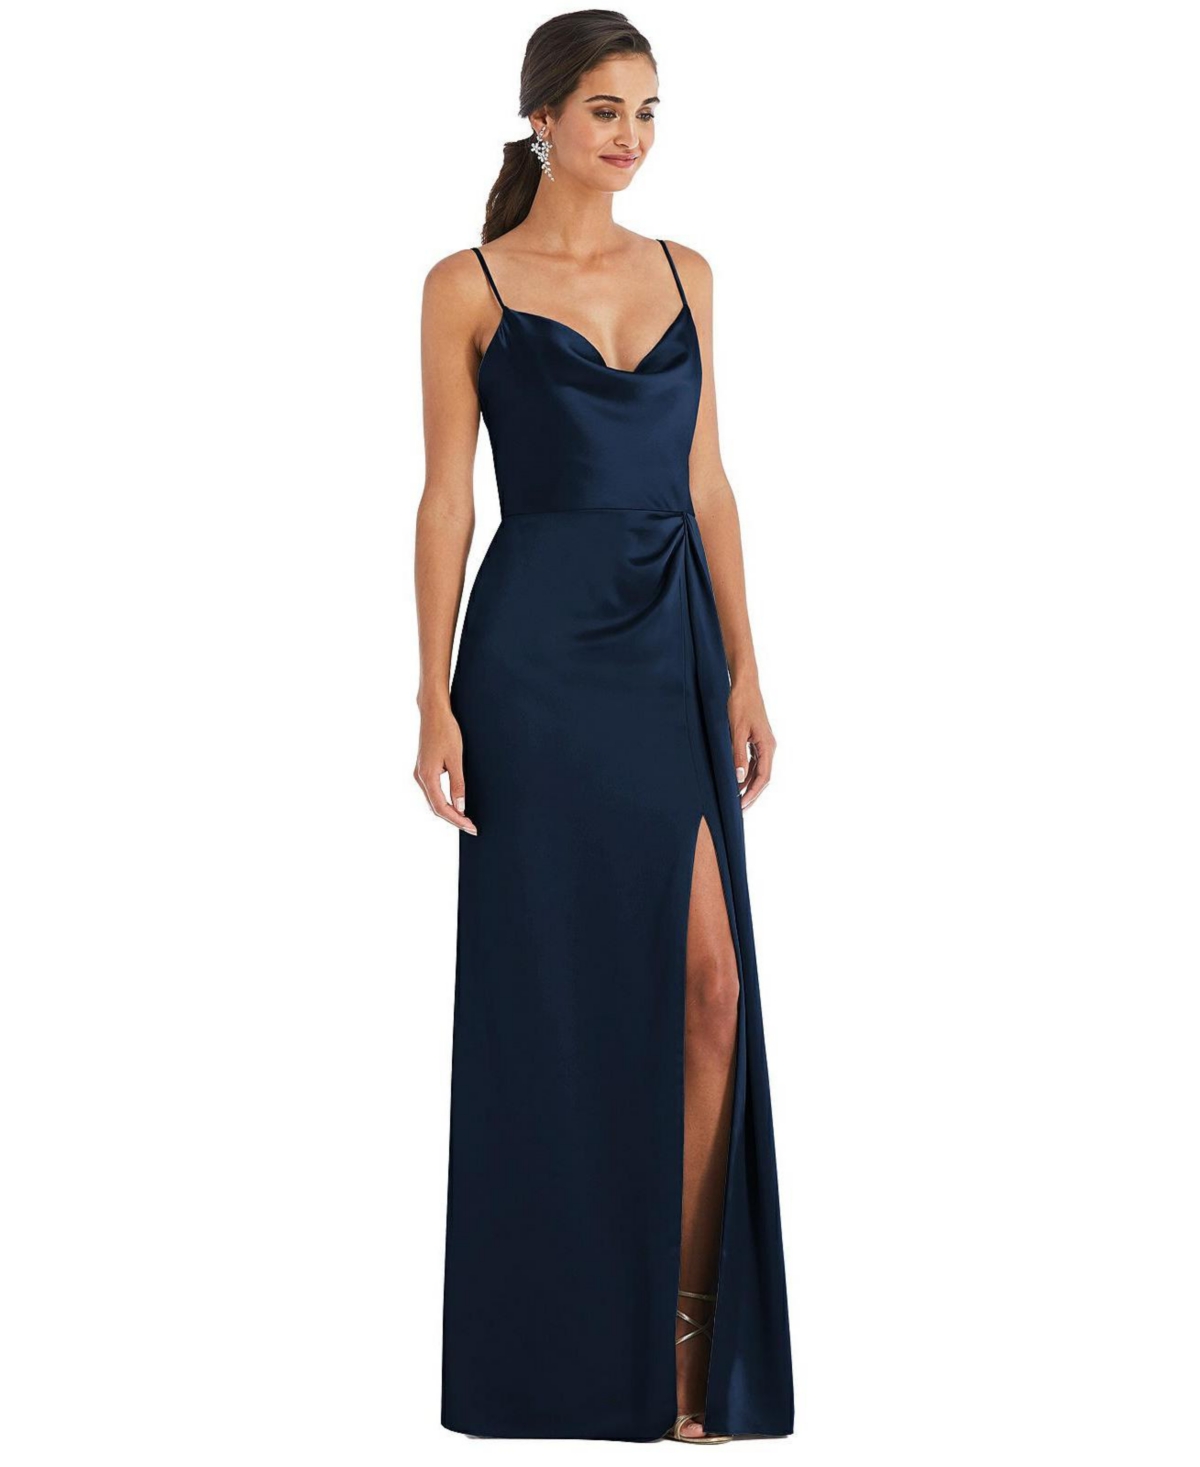 Women's Cowl-Neck Draped Wrap Maxi Dress with Front Slit - Midnight navy